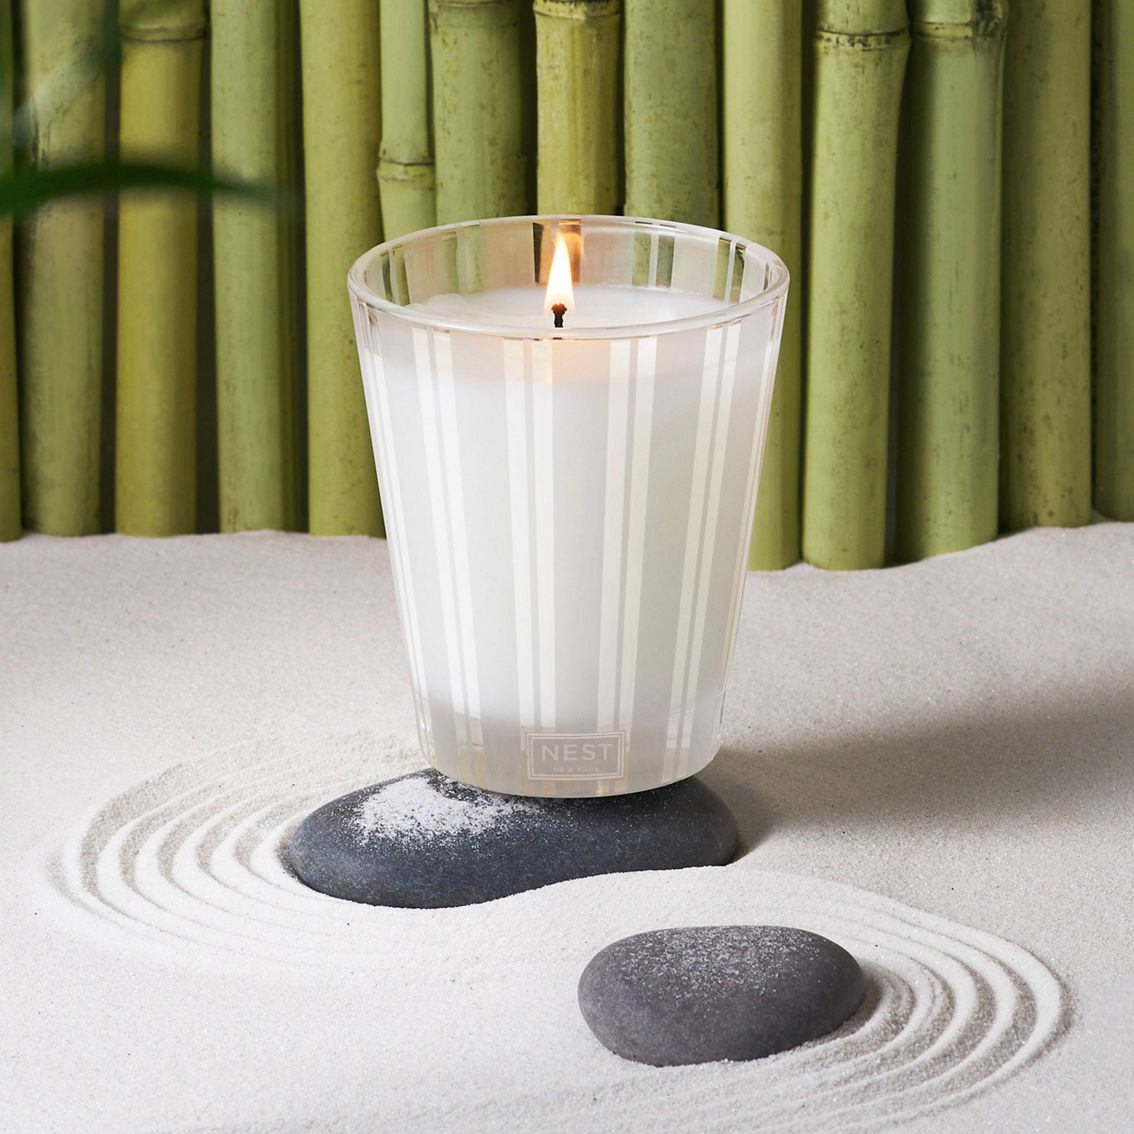 Nest Fragrances Bamboo Classic Candle, Candles & Home Fragrance, Household